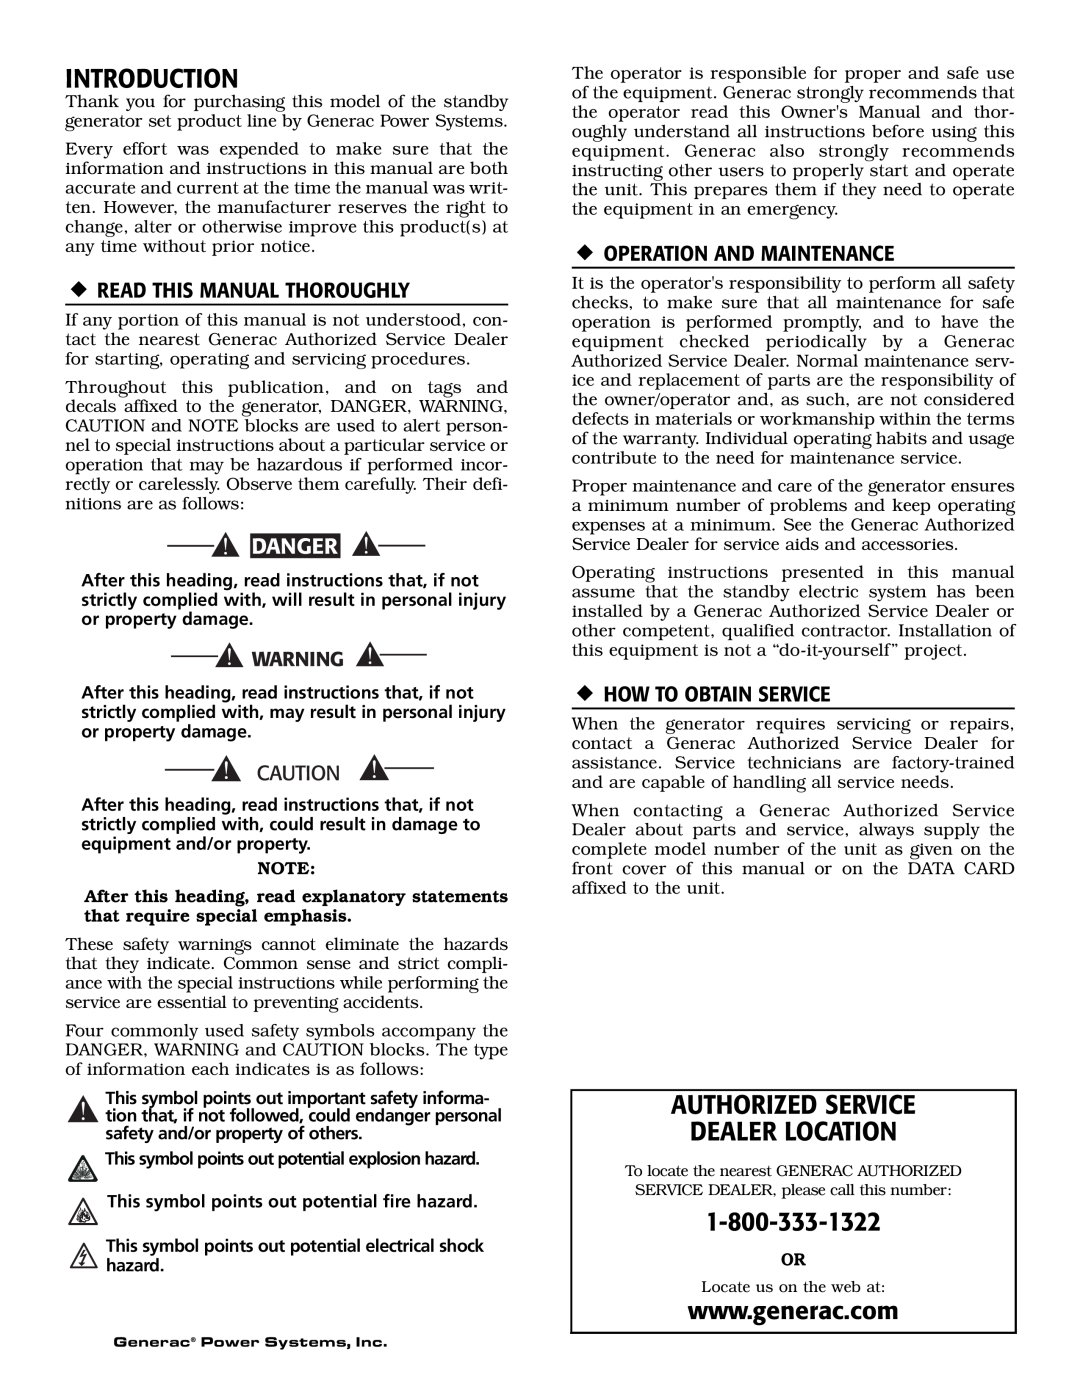 Generac Power Systems 004917-3 Introduction, Authorized Service Dealer Location, ‹Read This Manual Thoroughly, Danger 